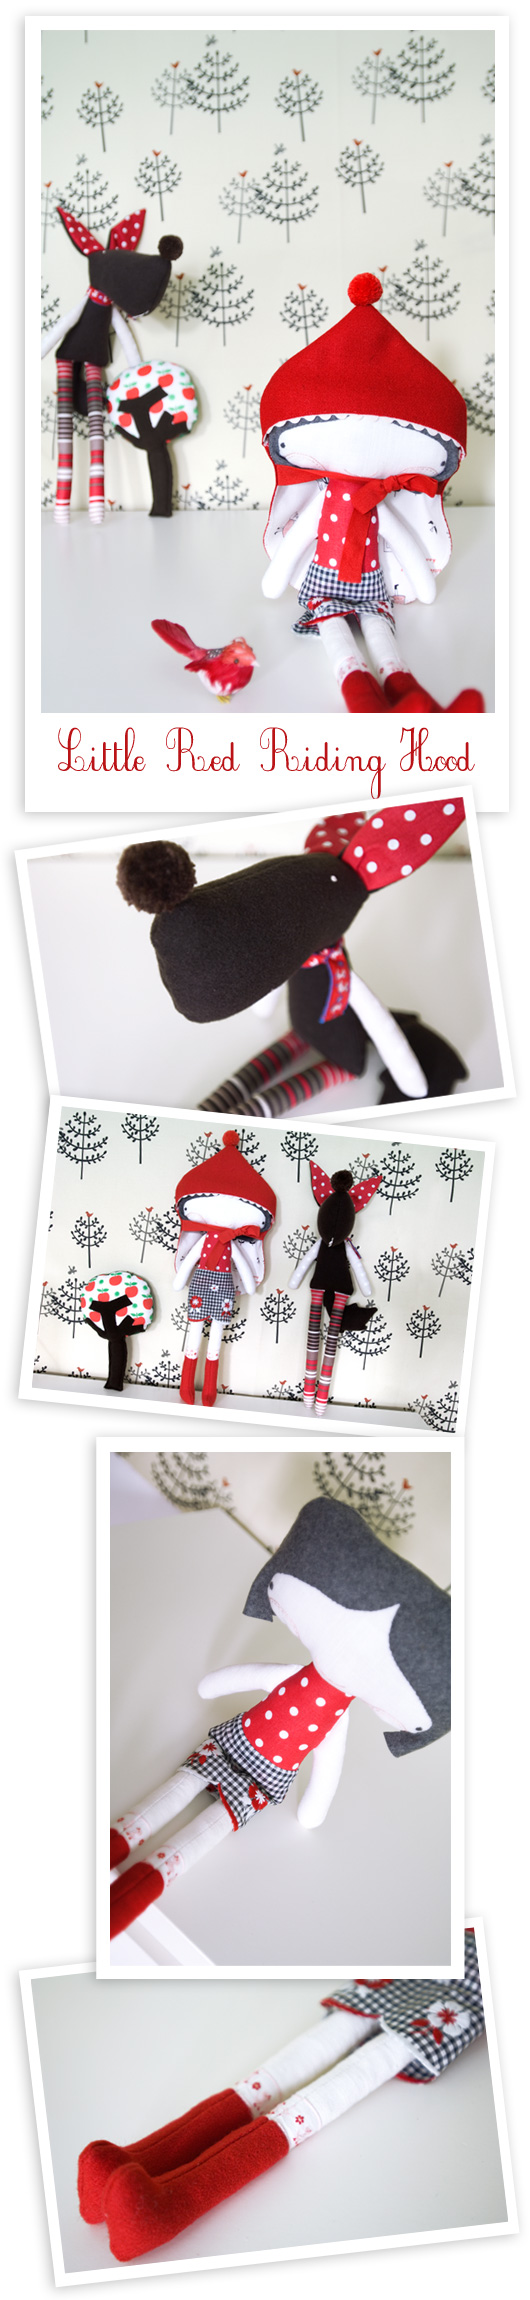 handmade softies from the tale Little Red Riding Hood